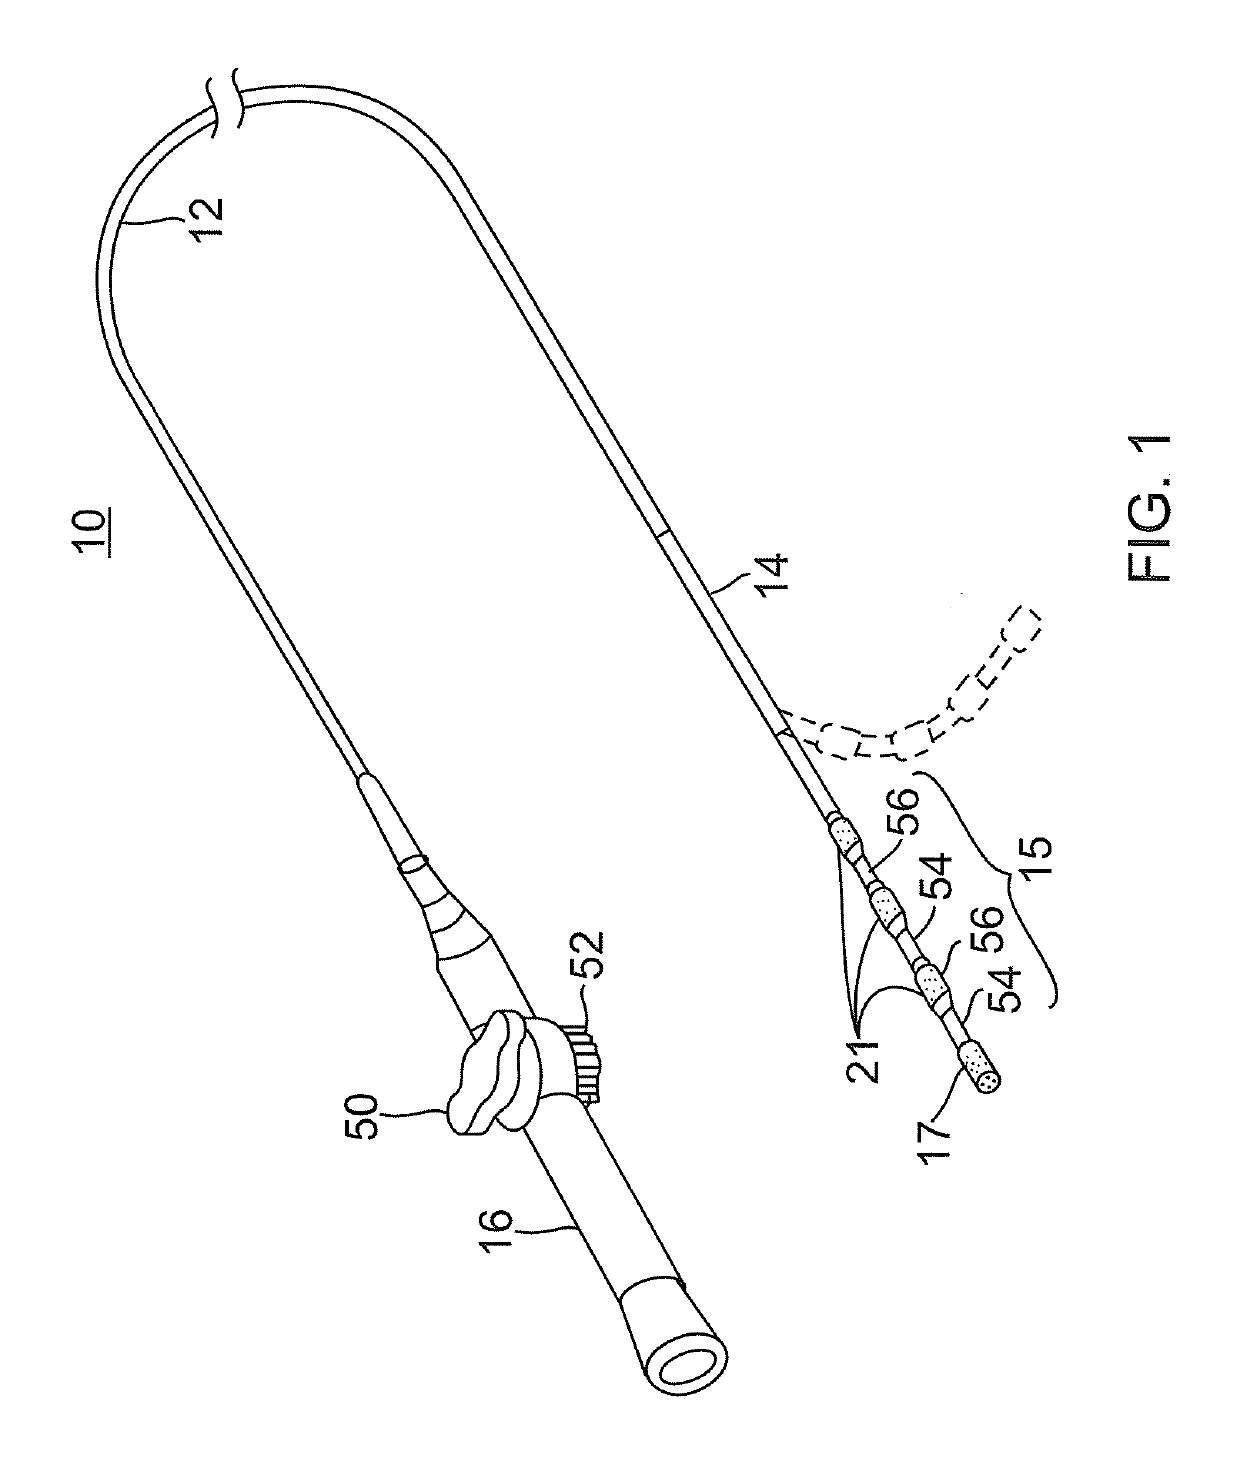 Catheter having a distal section with spring sections for biased deflection